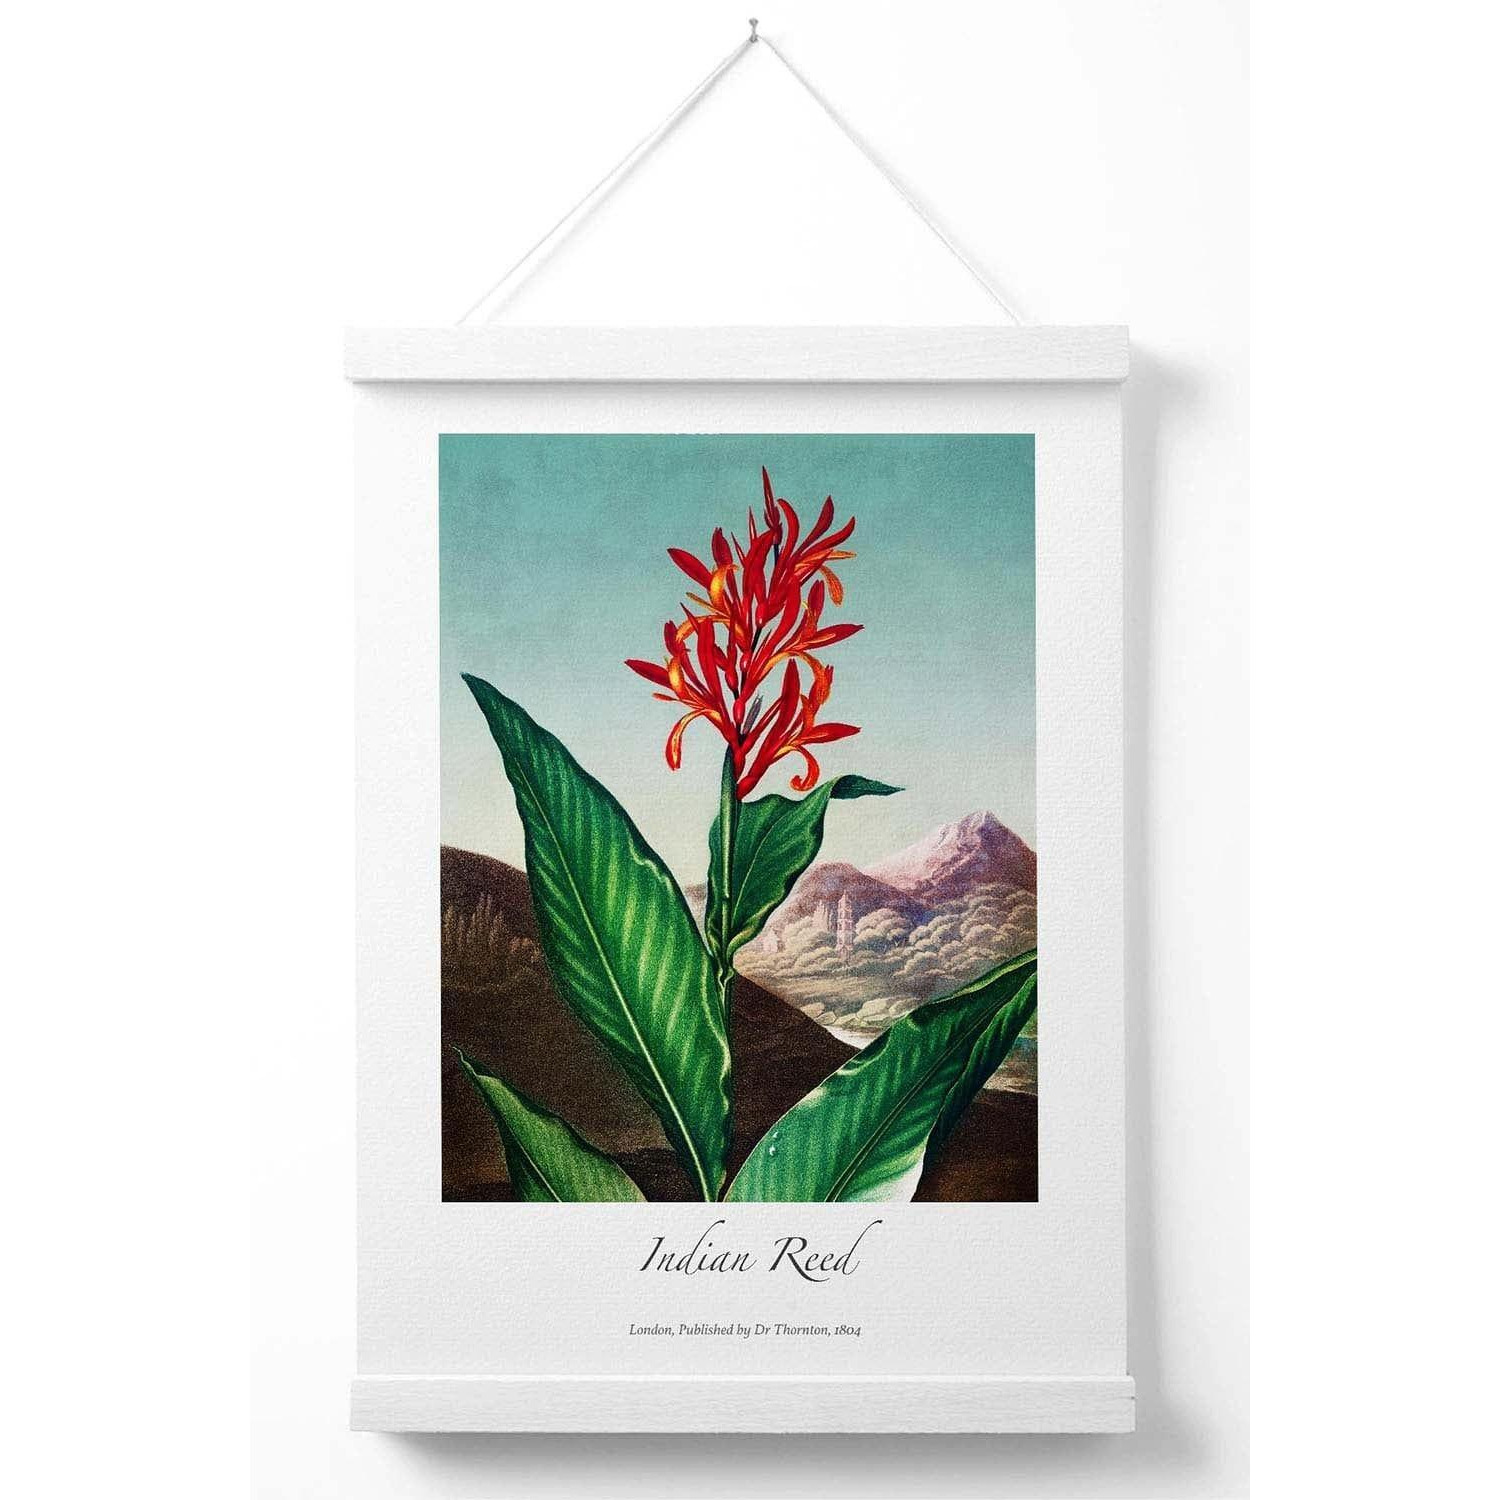 Vintage Floral Exhibition -  Indian Reed Poster with White Hanger - image 1